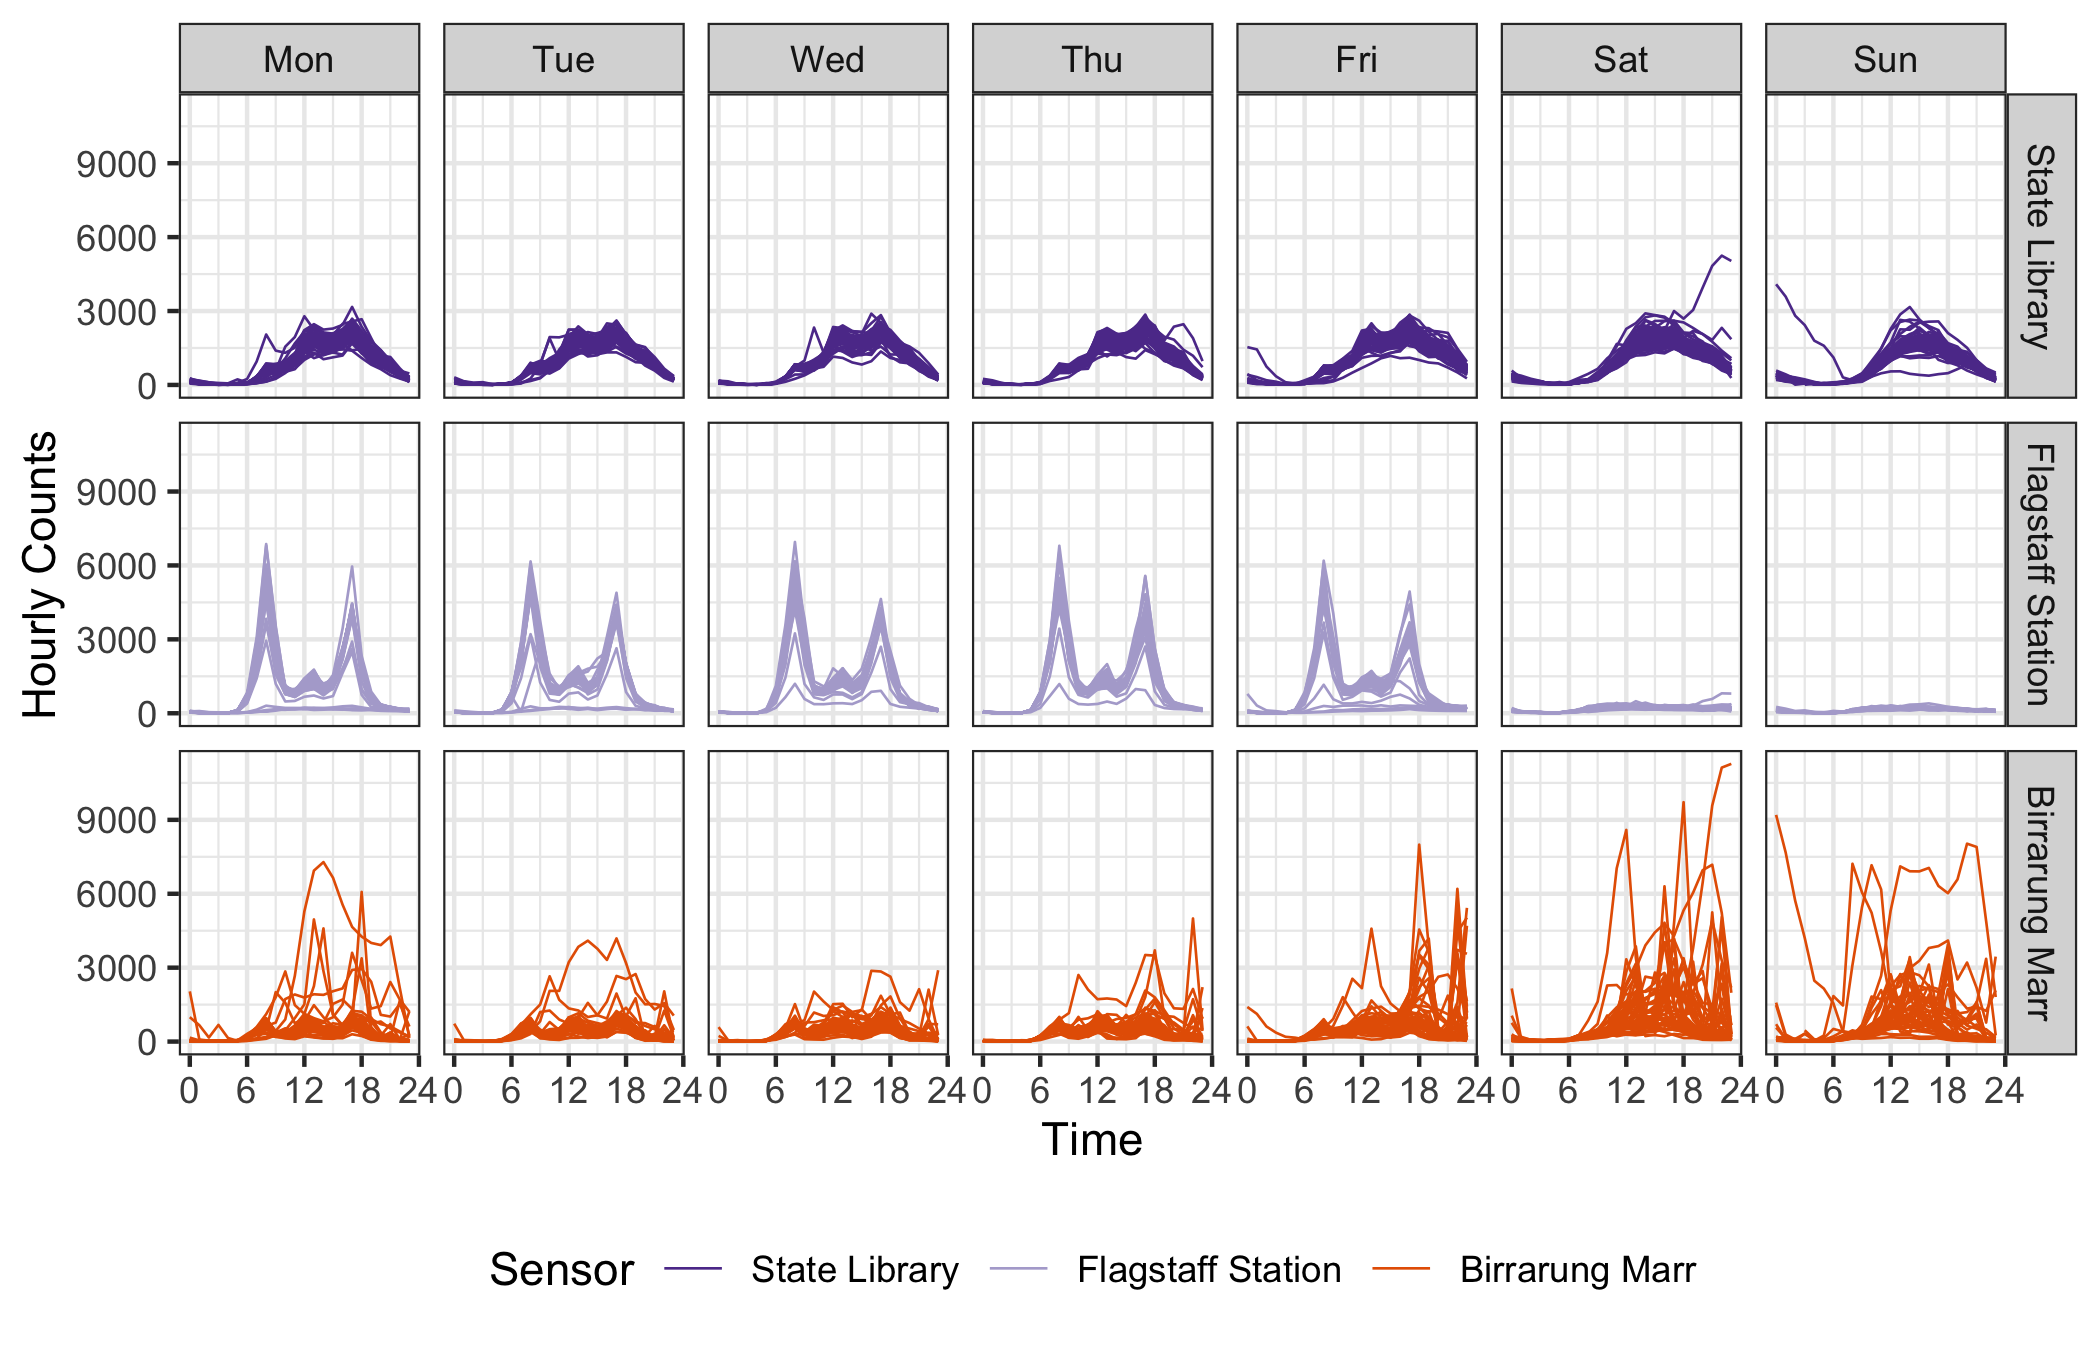 Hourly pedestrian counts for 2016, faceted by sensors, and days of the week. The focus is on time of day and day of week across the sensors. Daily commuter patterns at Flagstaff Station, the variability of the foot traffic at Birrarung Marr, and the consistent pedestrian behavior at the State Library, can be seen.